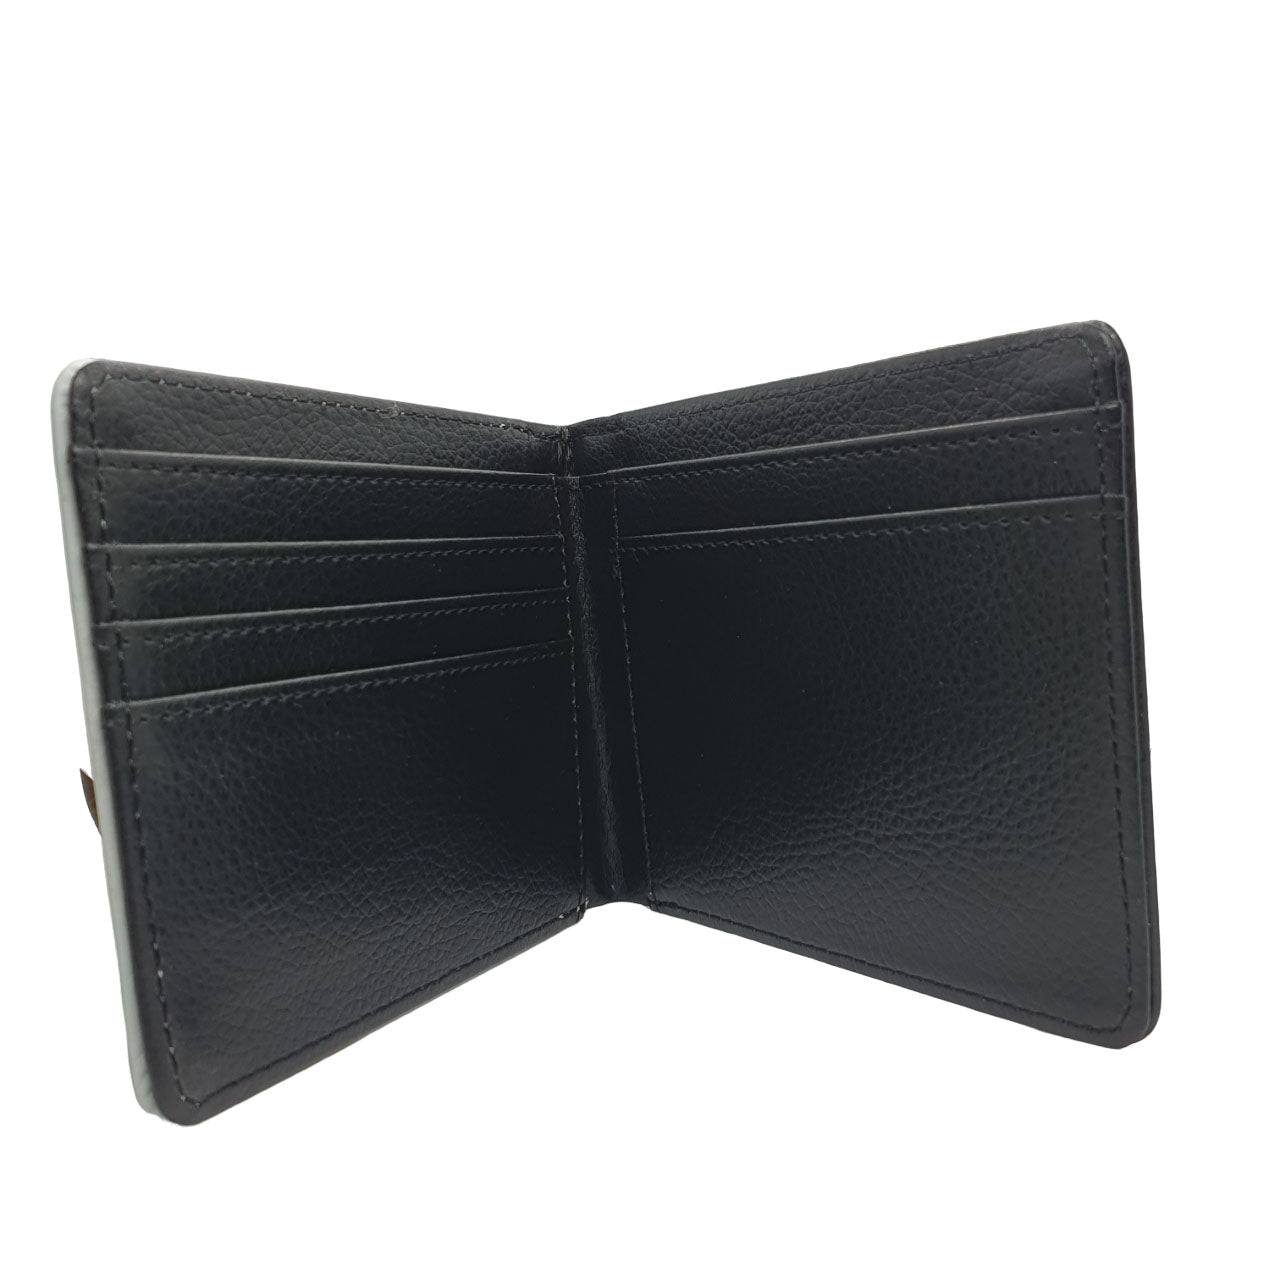 open wallet black leather effect with slots for cards and cash